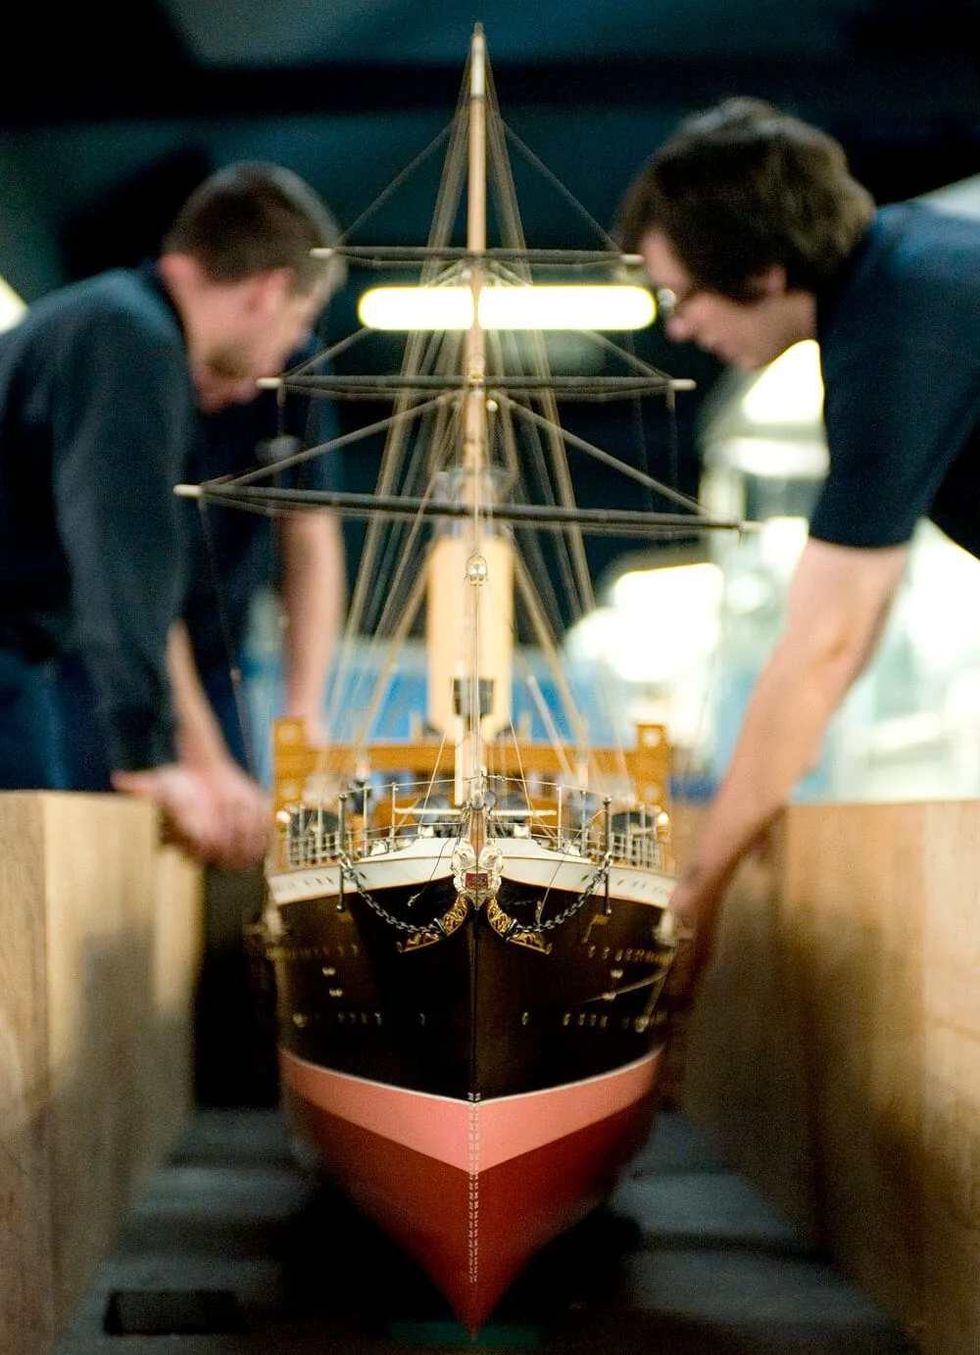 Two staff members at Riverside Museum holding a large model of a ship.